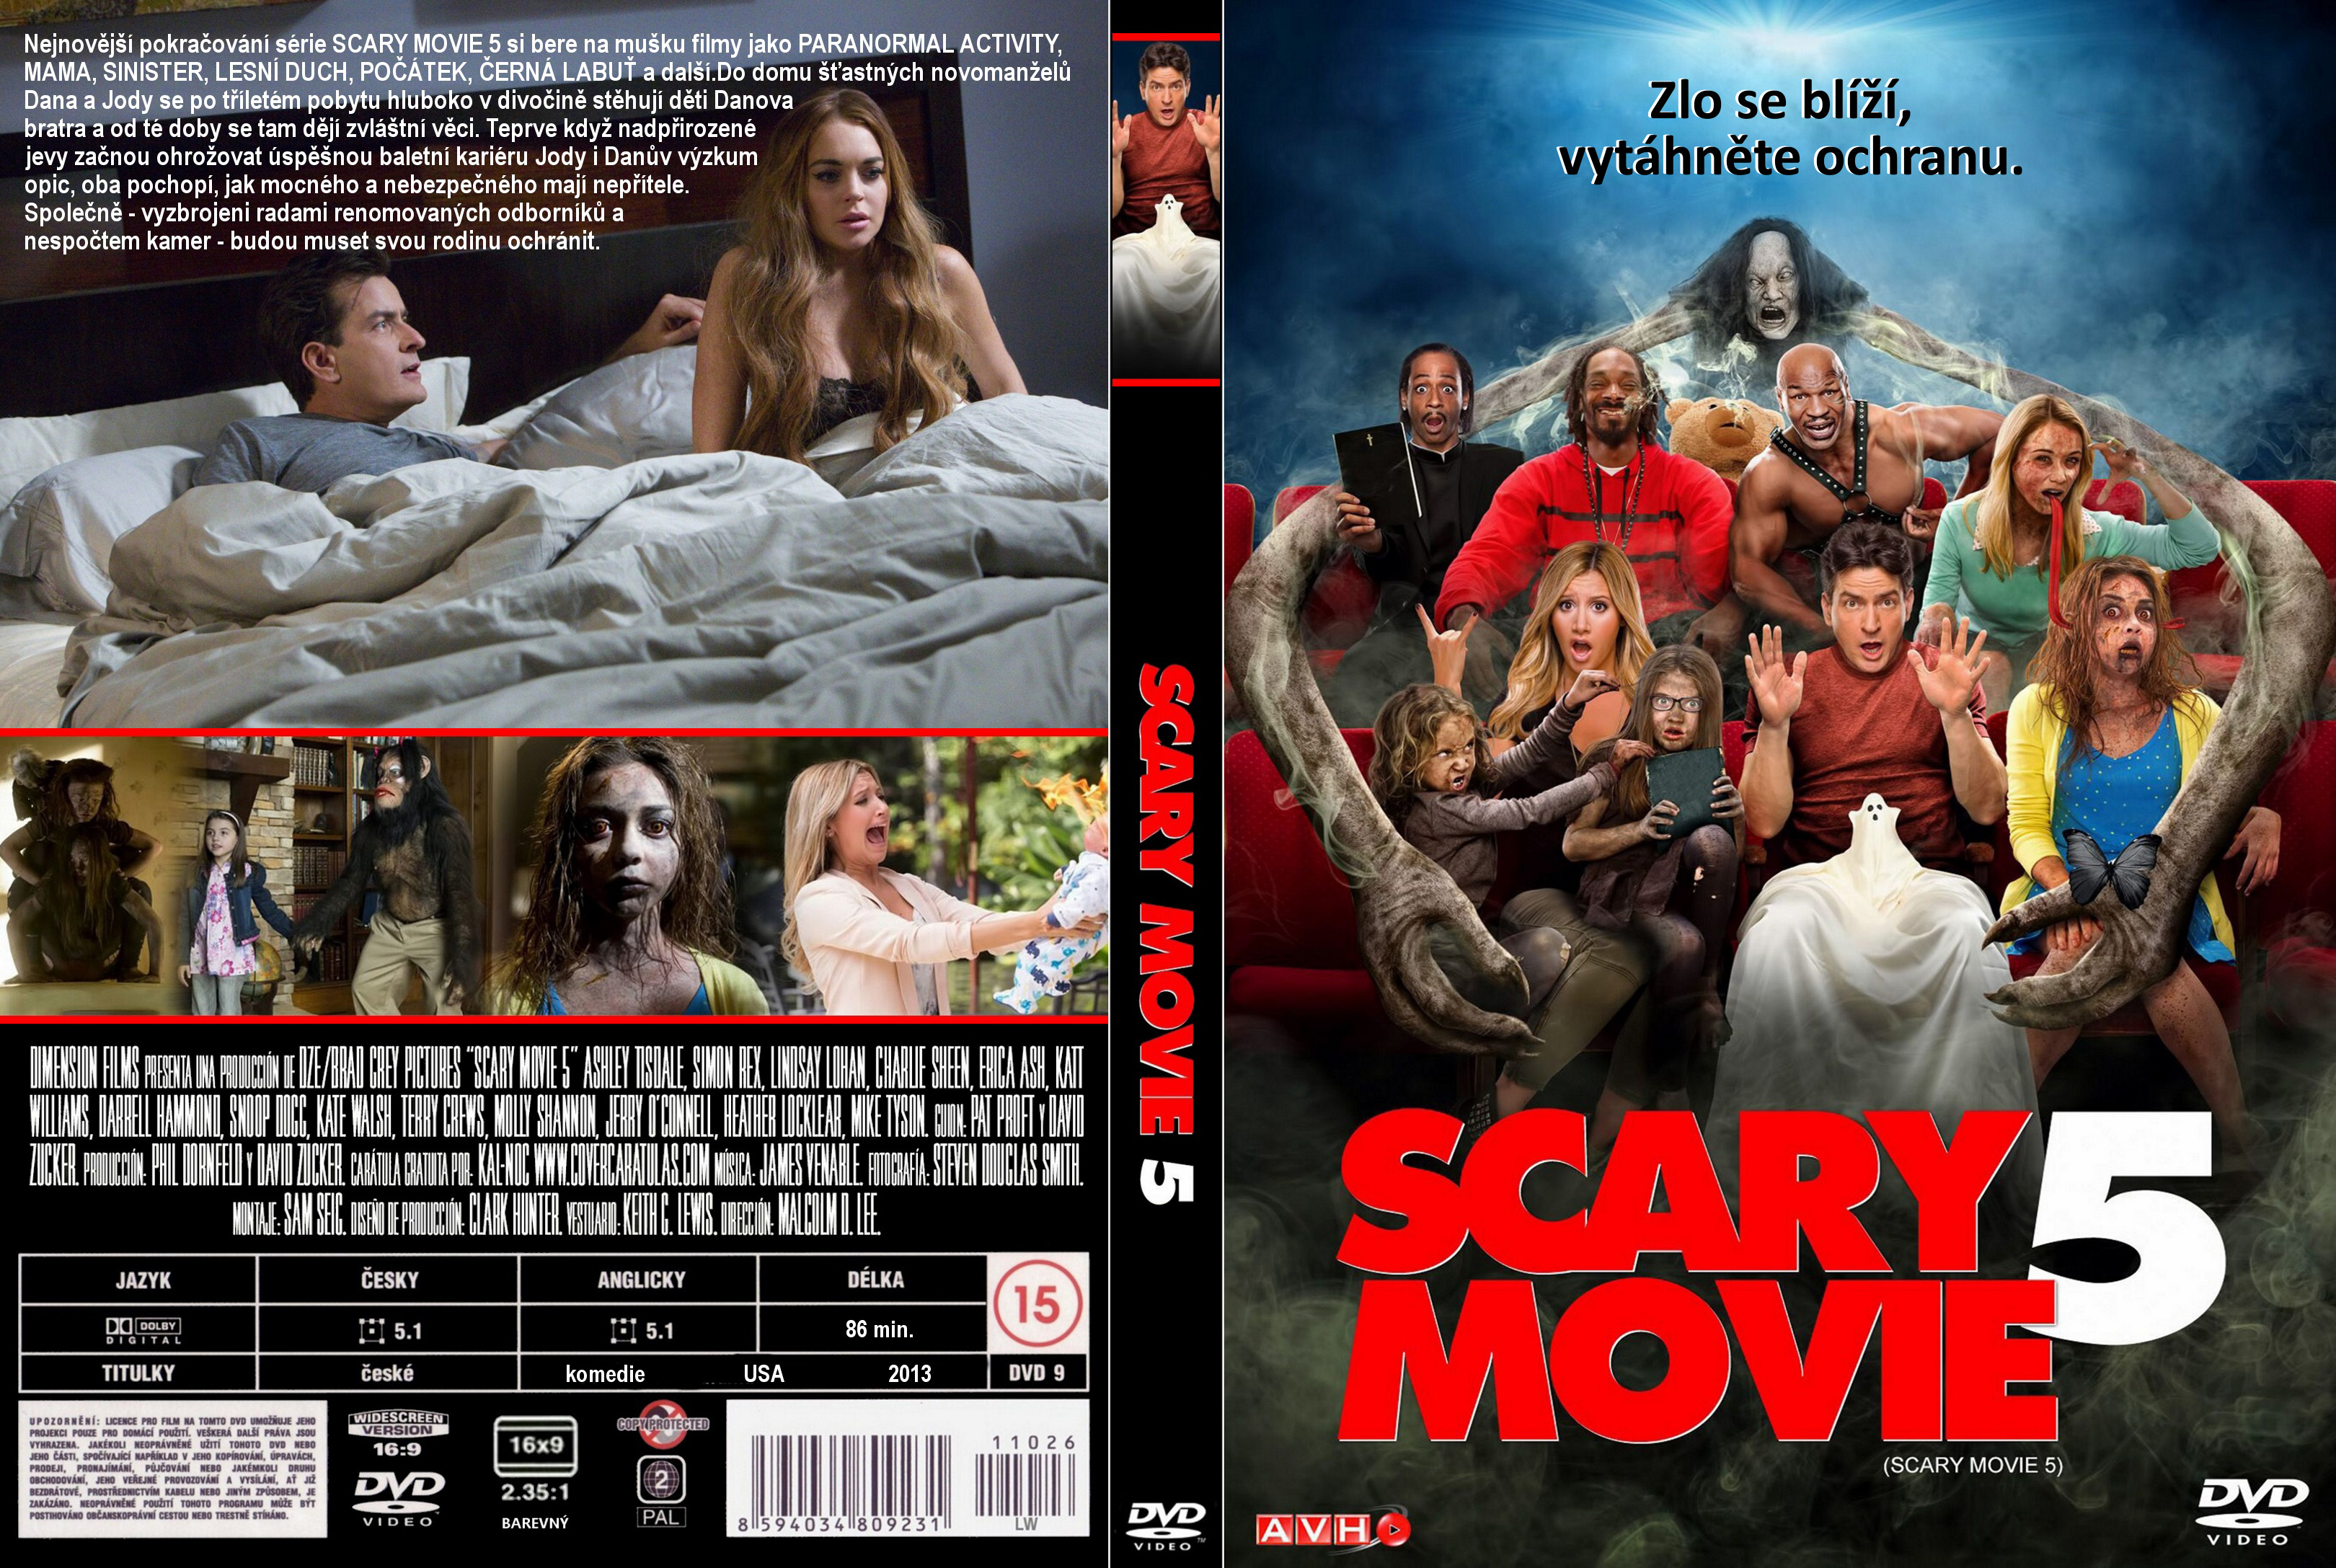 Scary movie porn compilation